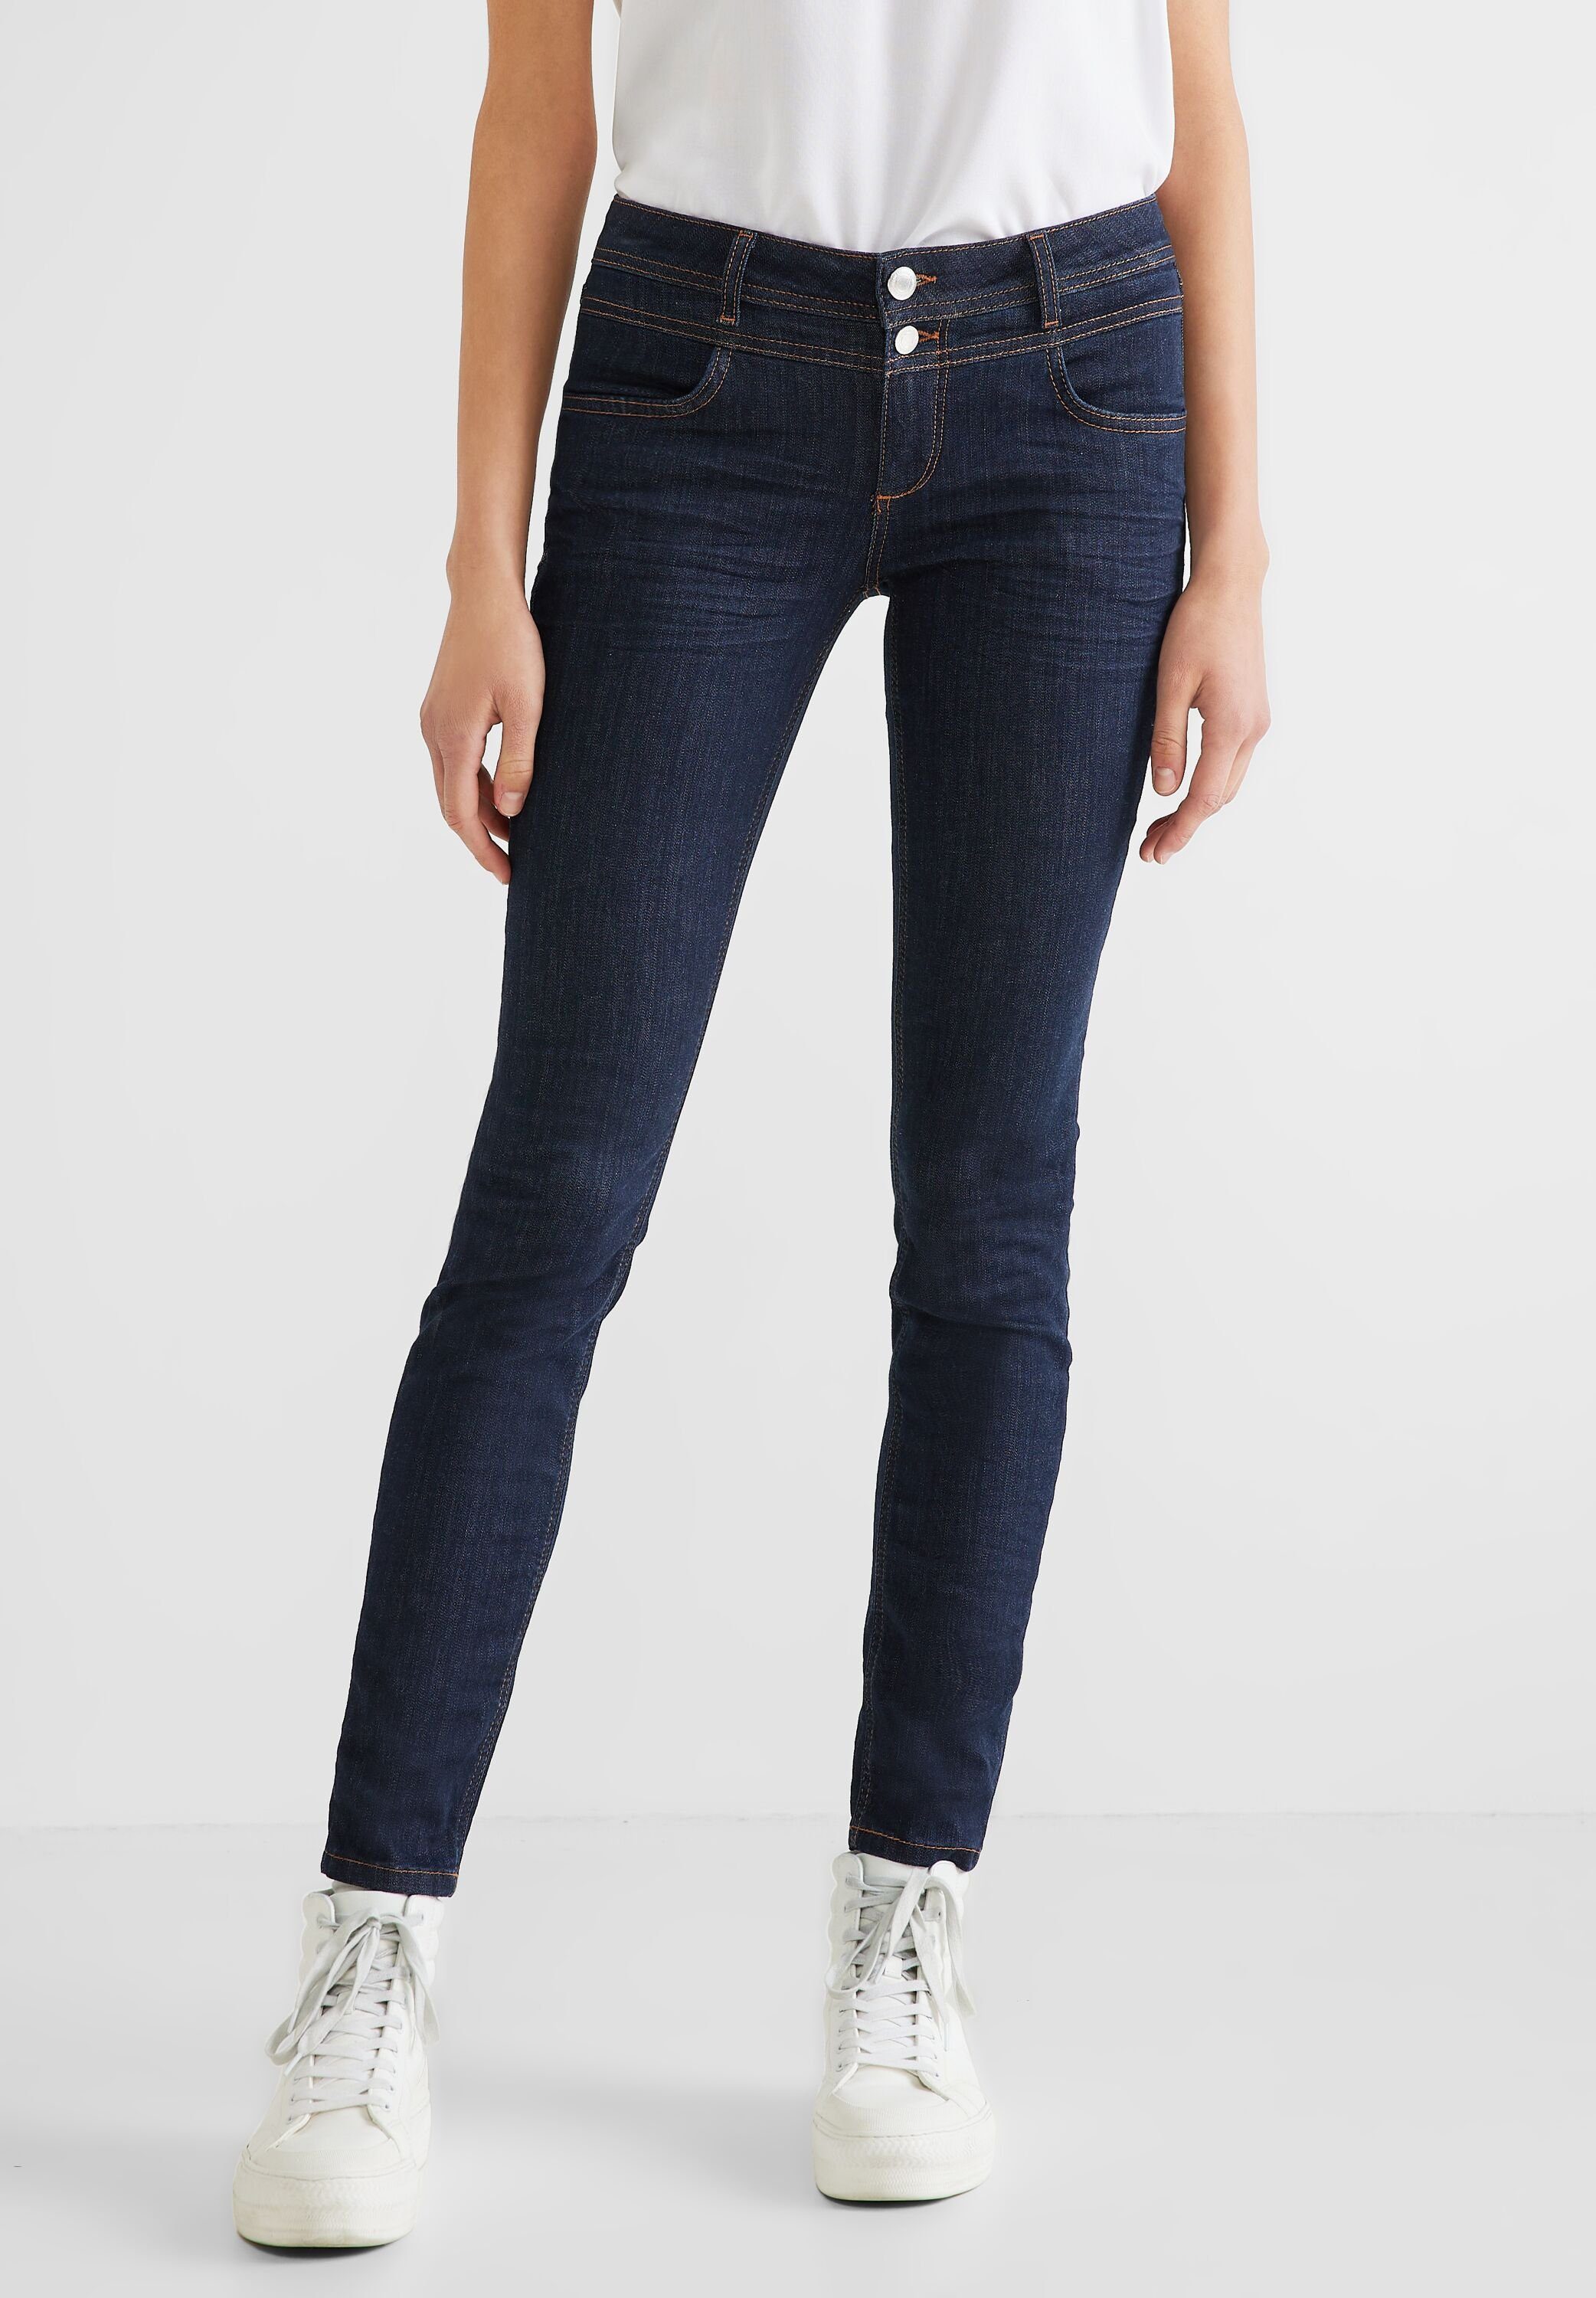 STREET 4-Pocket Gerade ONE Style Jeans